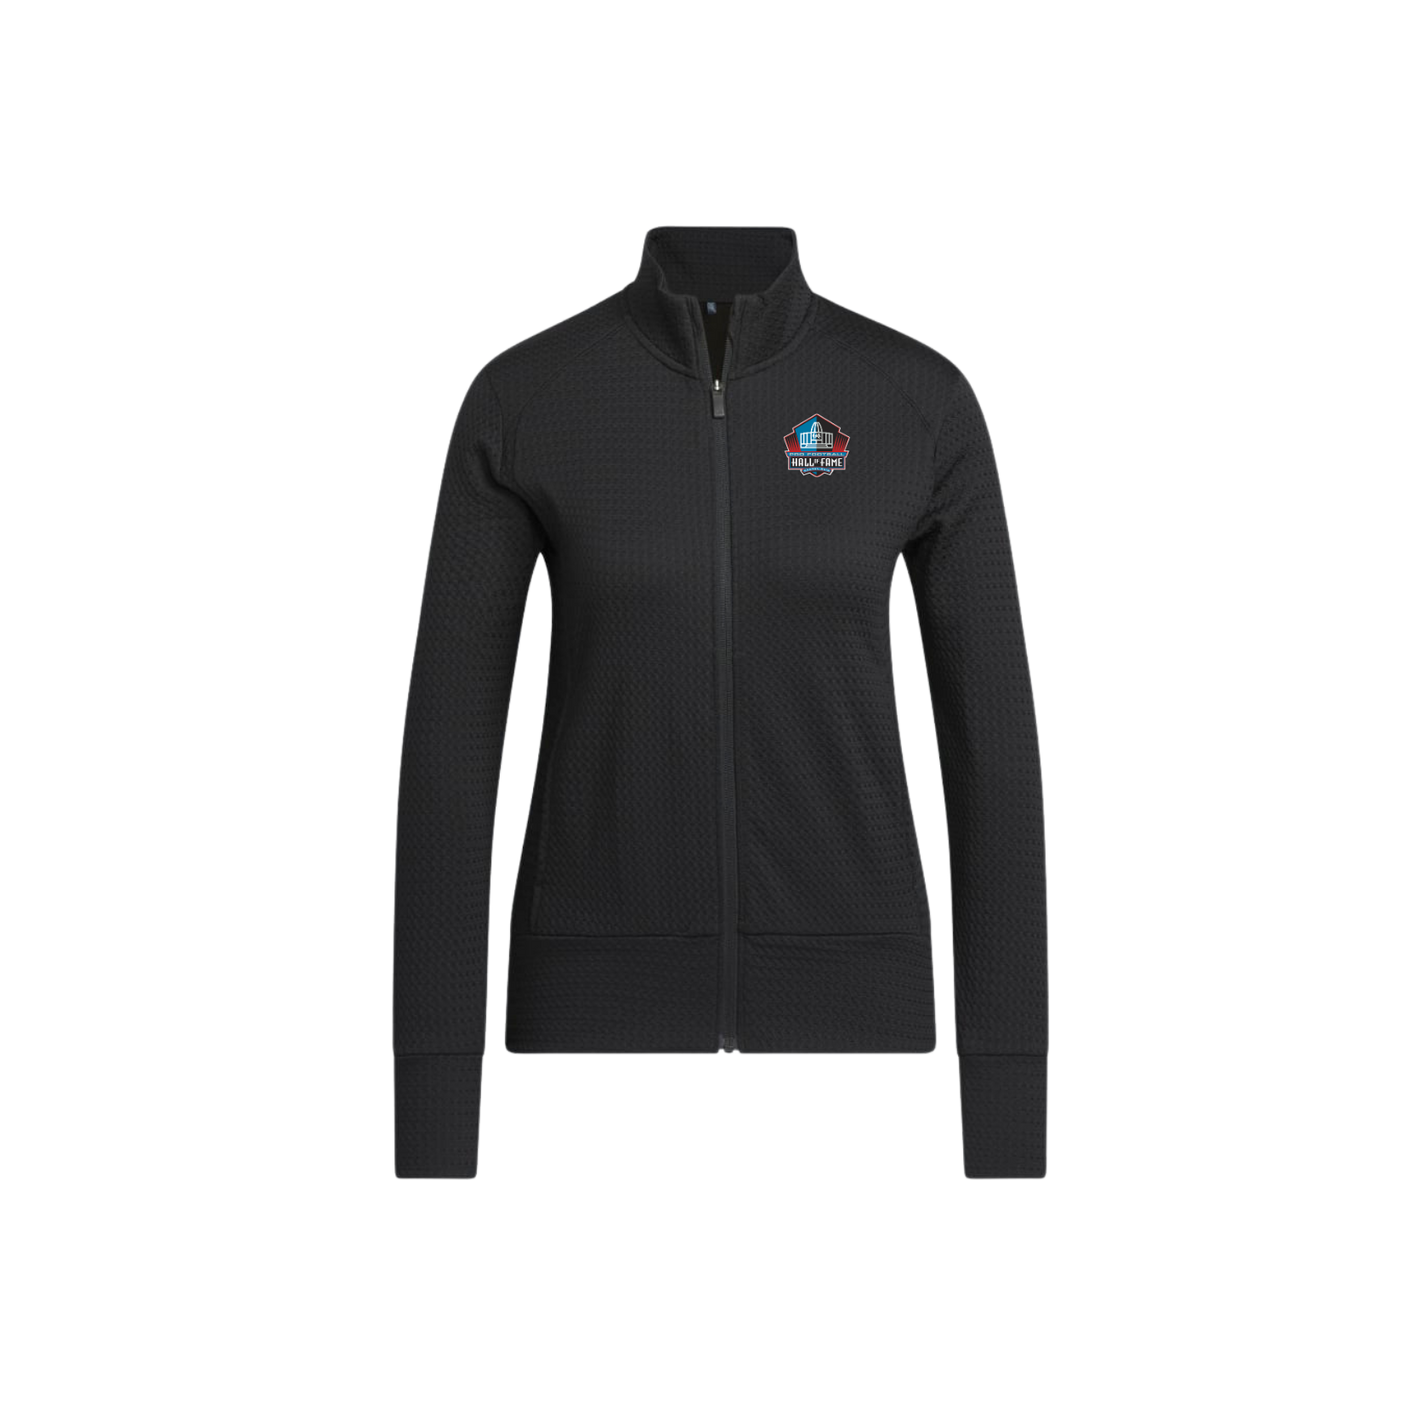 Hall of Fame Women's Adidas Textured Jacket